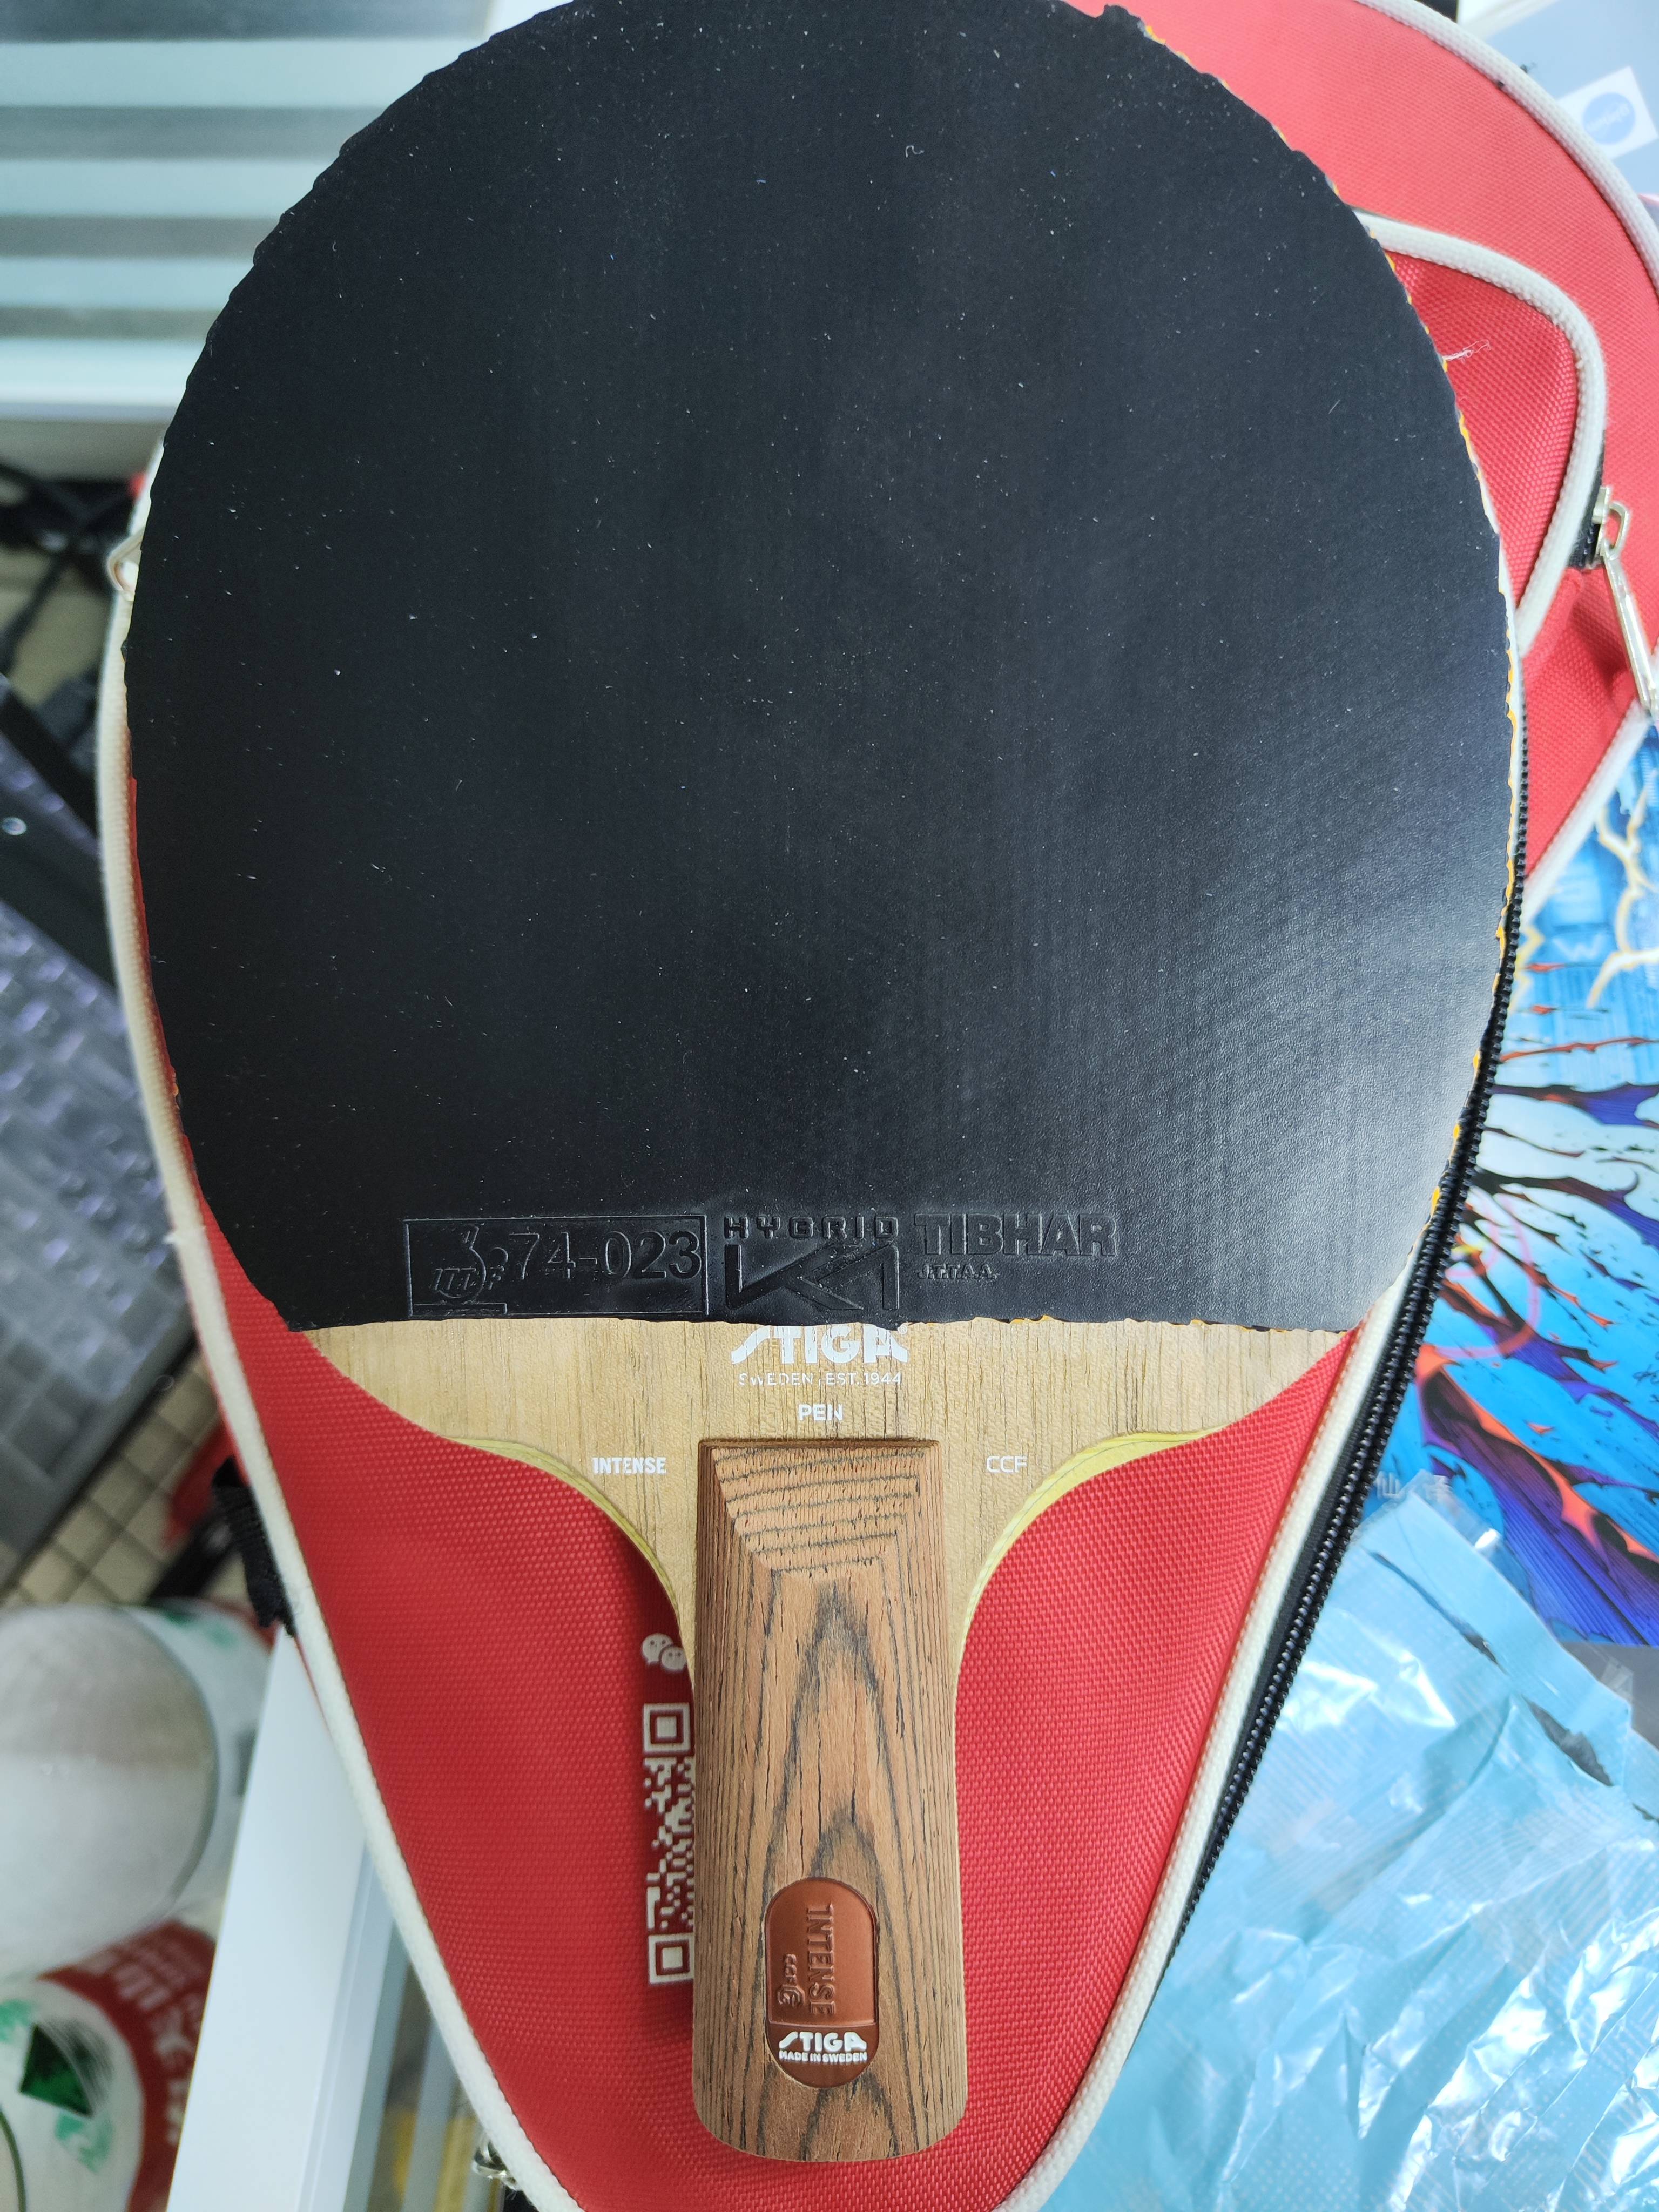 Have a try on the brand new Stiga's intense CCF walnut carbon blade |  TableTennisDaily